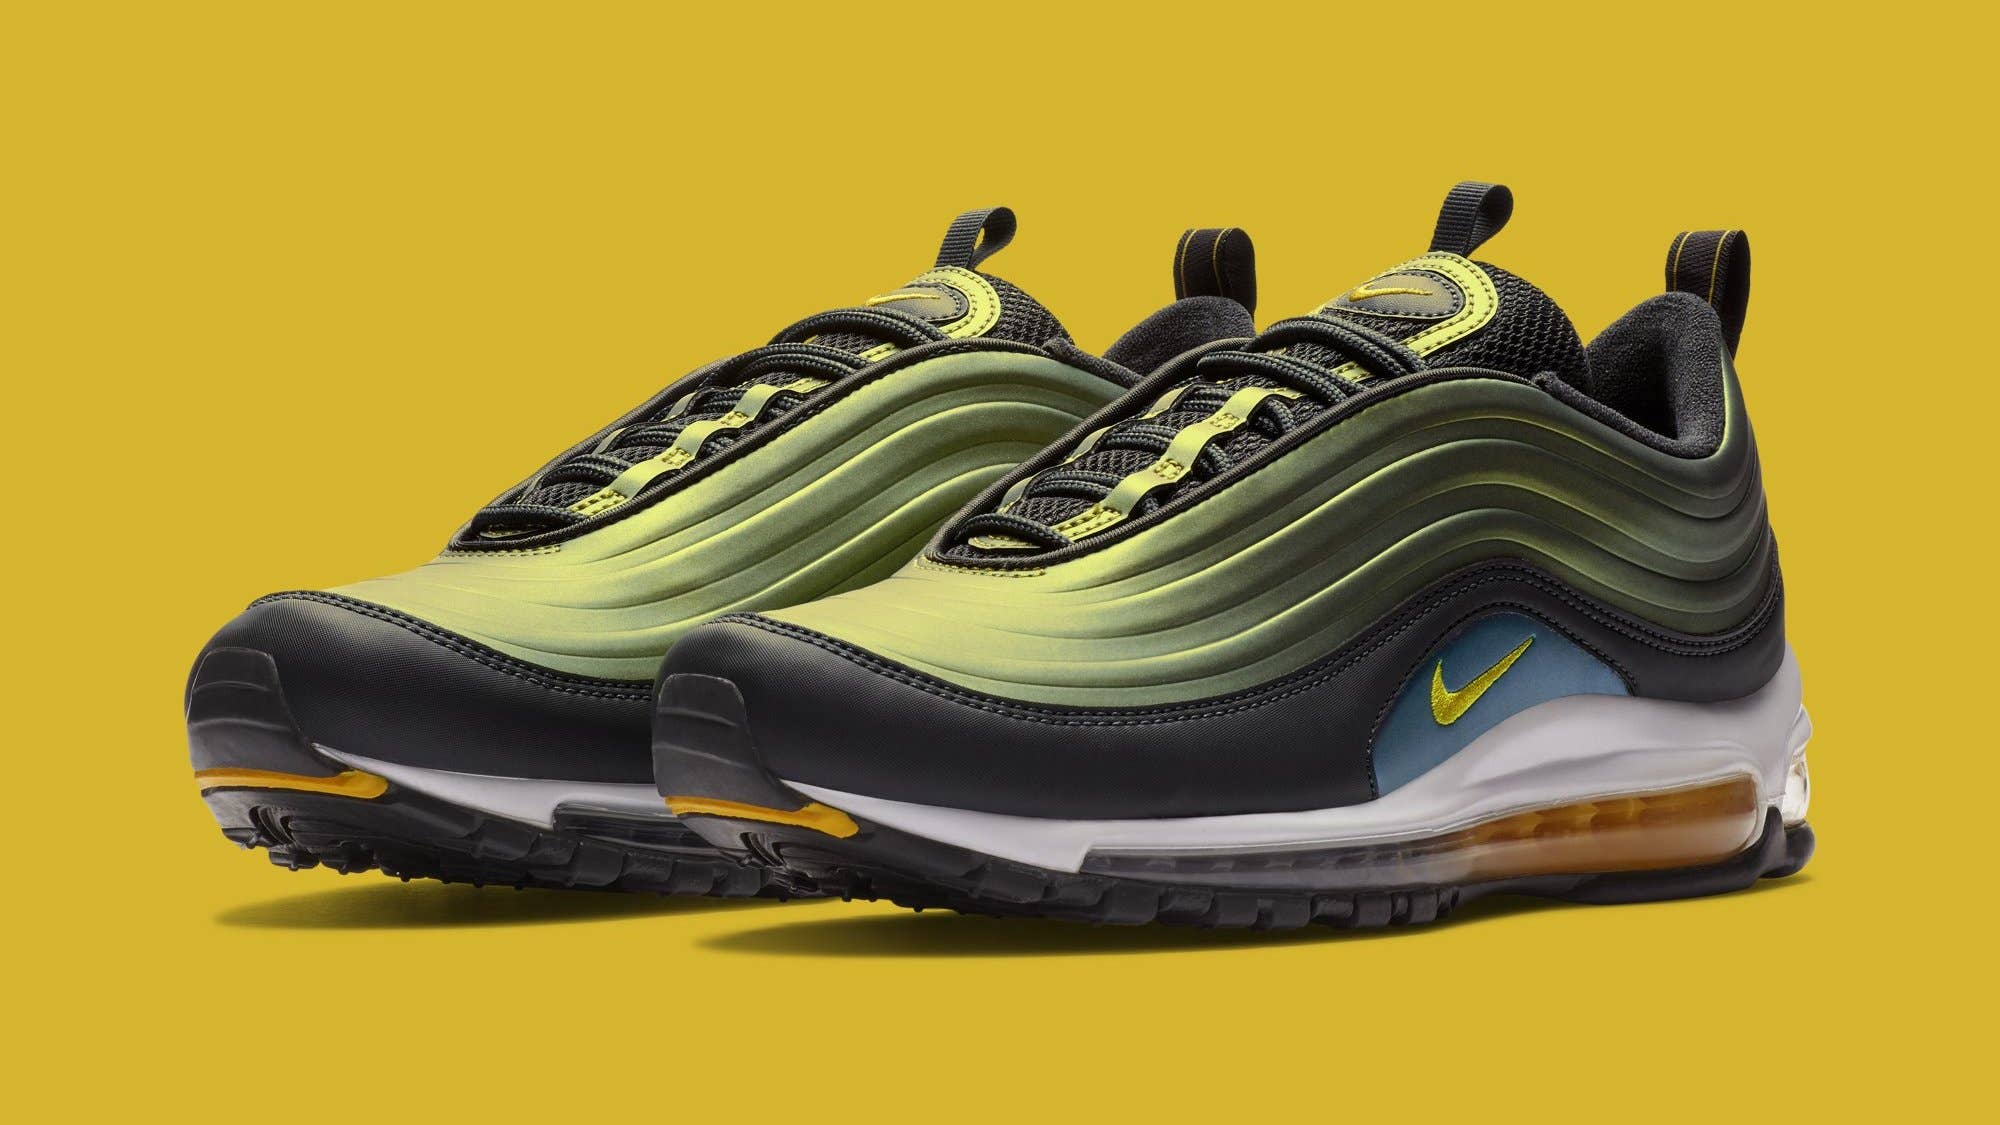 An Upper Covers This Nike 97 Complex